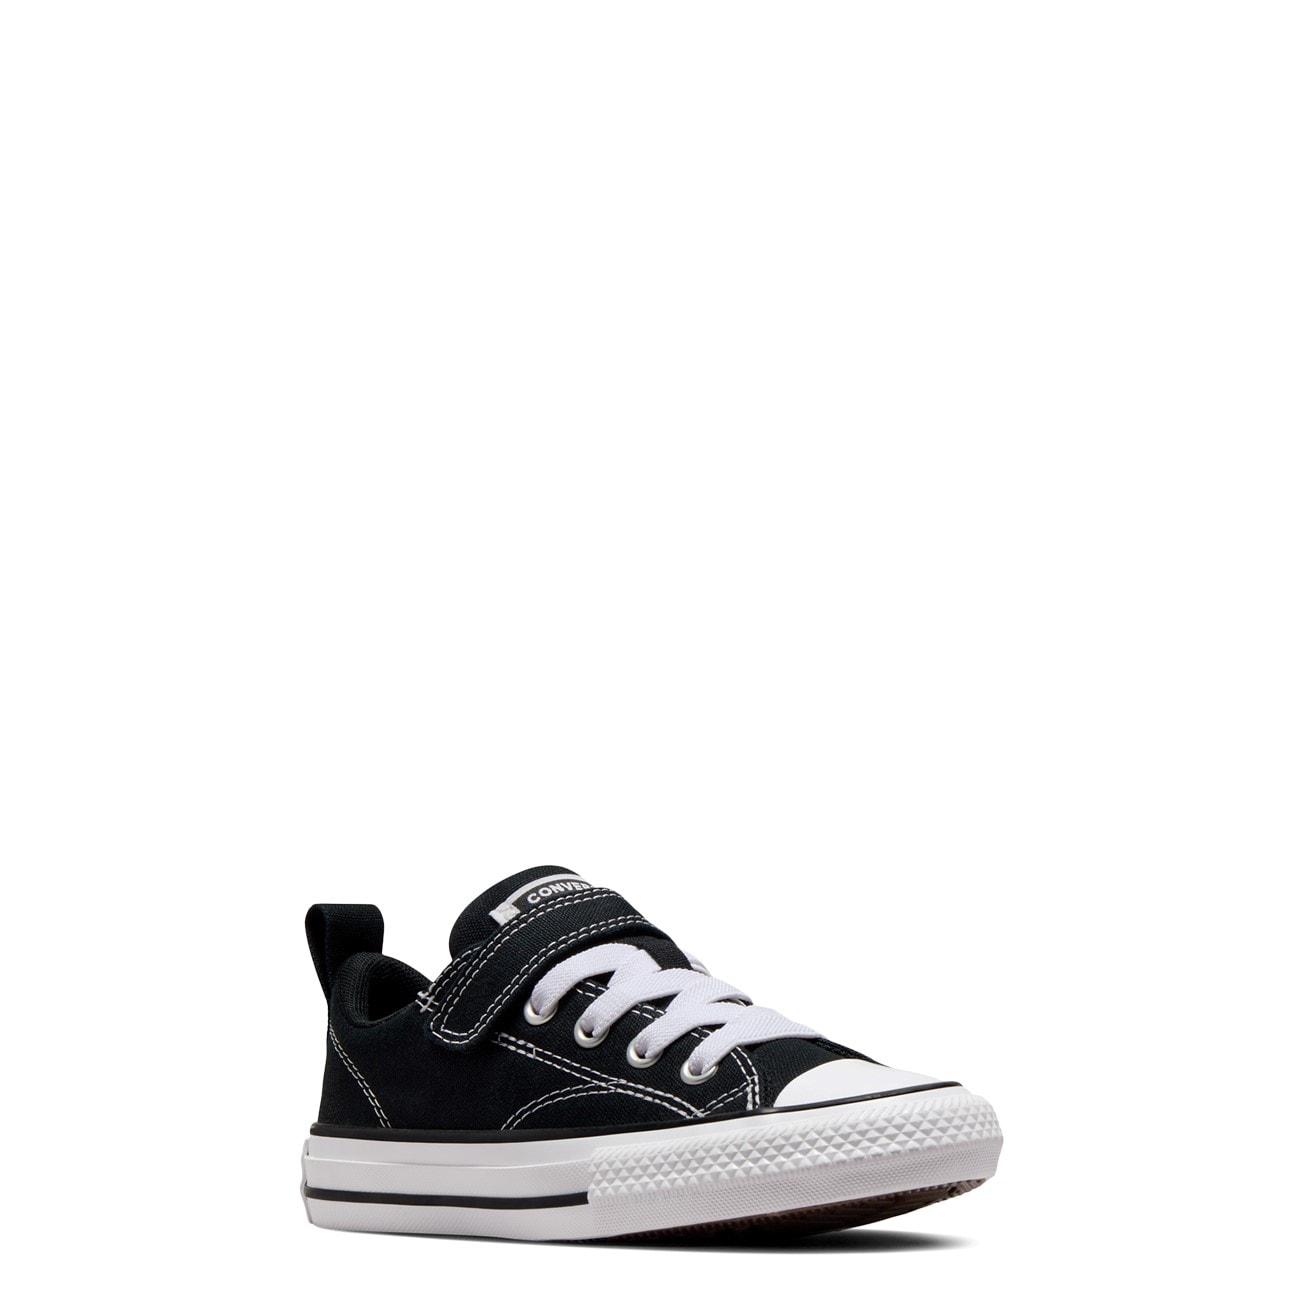 Youth Boys' Chuck Taylor All Star Malden Street Oxford Sneakers